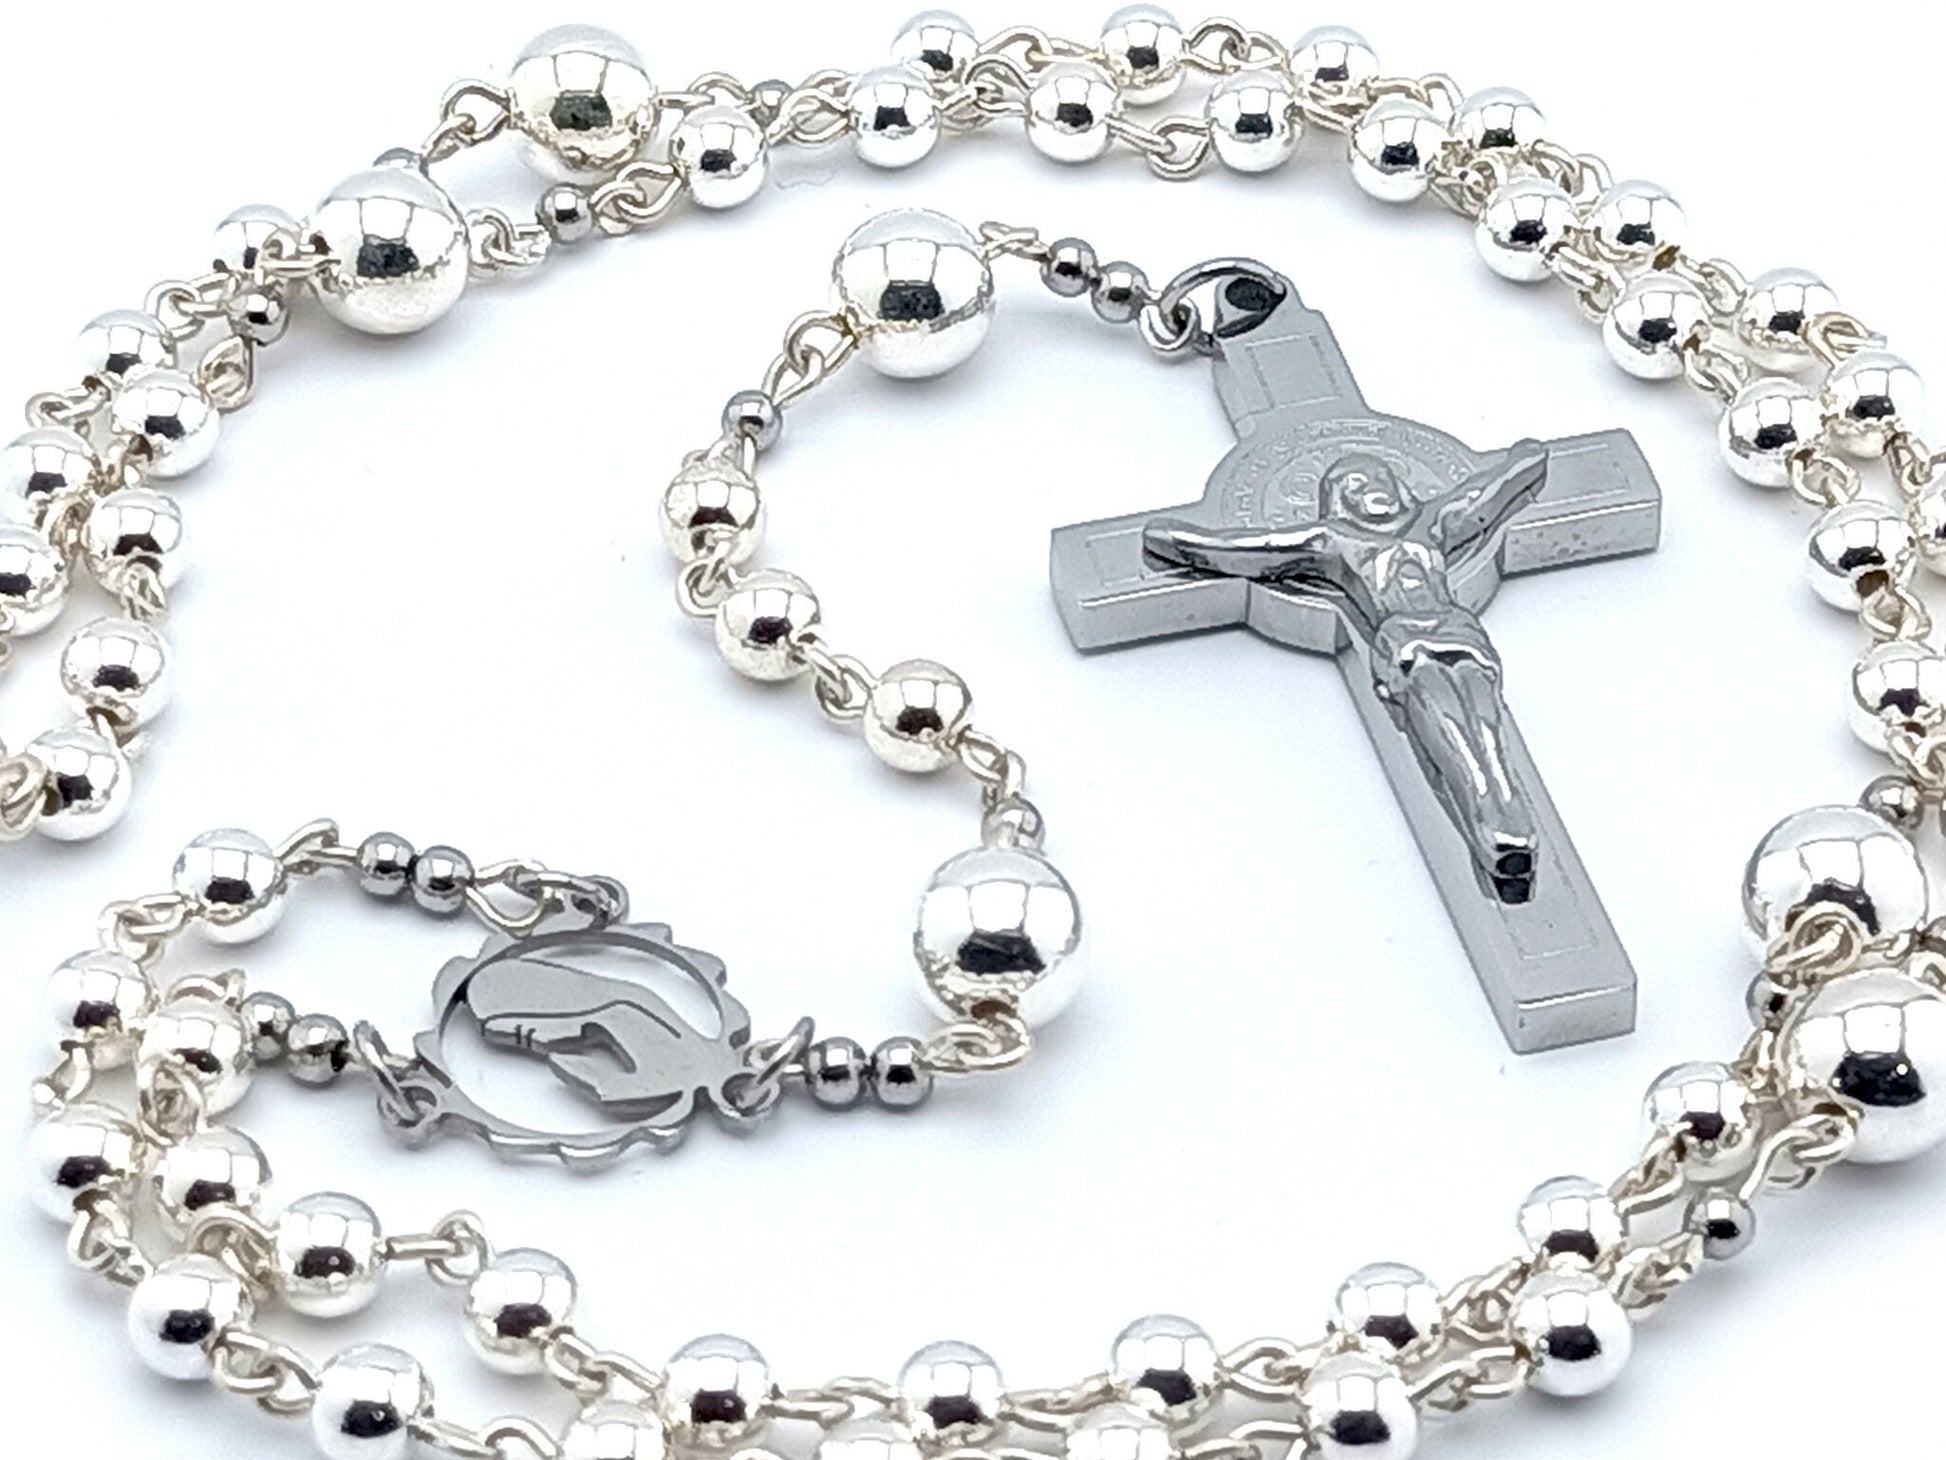 Virgin Mary unique rosary beads 925 sterling silver rosary necklace with stainless steel Saint Benedict crucifix and virgin centre medal.